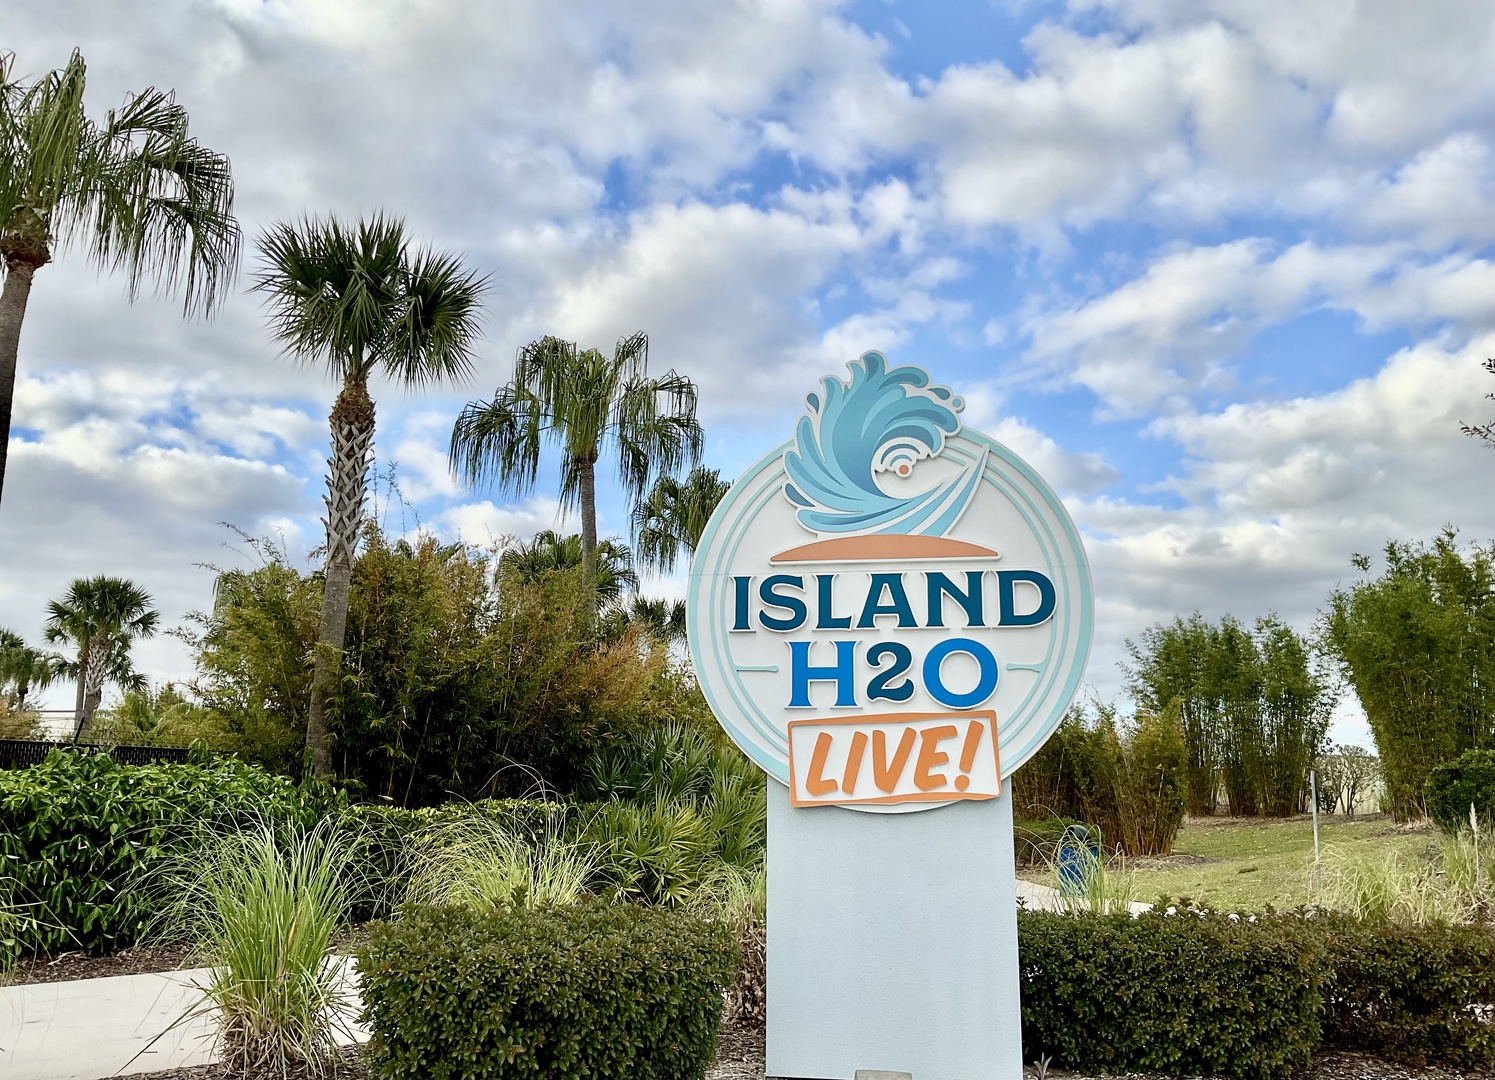 Island H20 is 2 minutes from home!